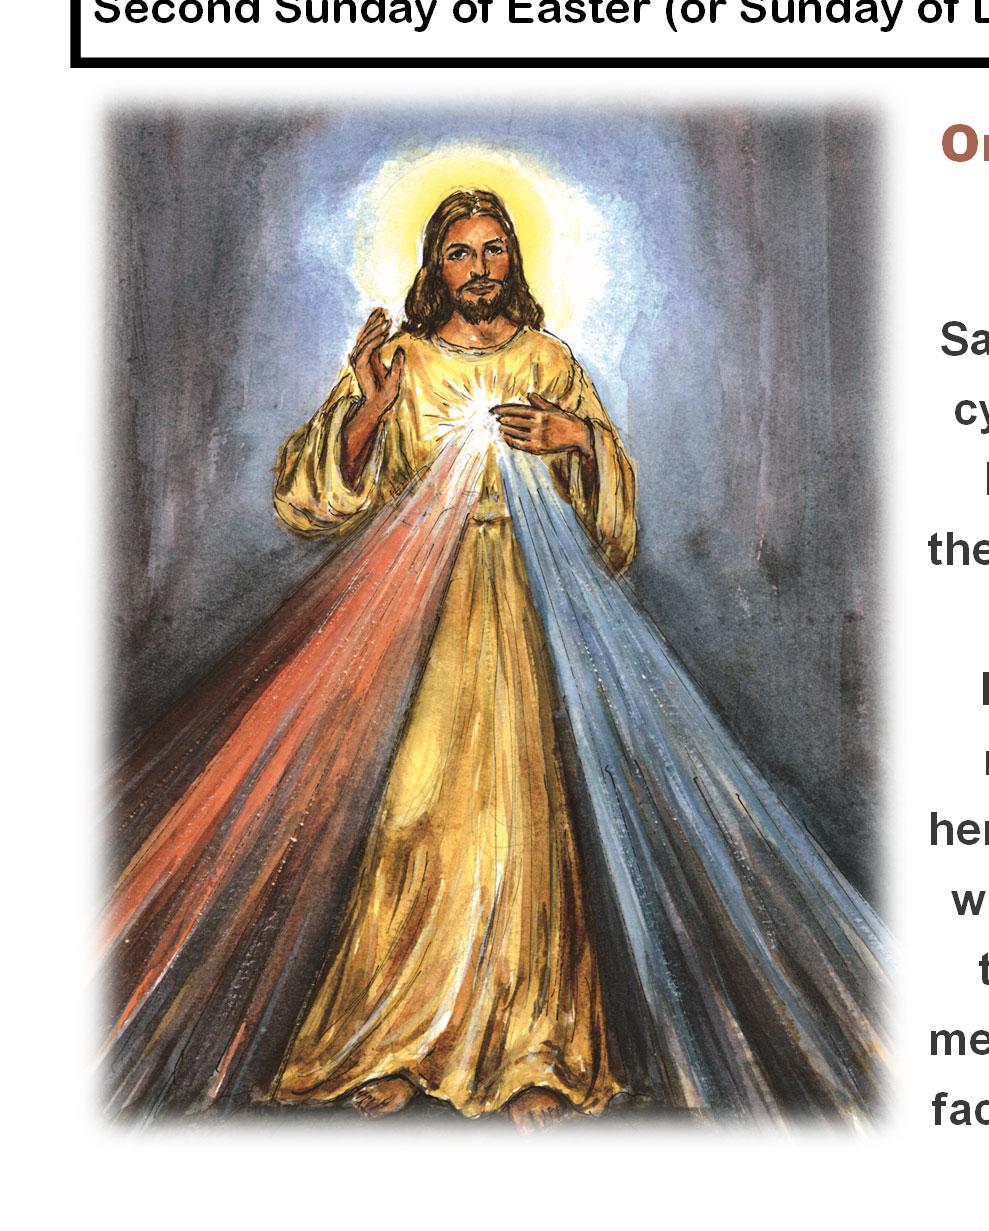 Second Sunday of Easter (or Sunday of Divine Mercy) Page 5 Origin of Divine Mercy Sunday, the Divine Mercy image, the Chaplet, and the Novena Saint Faustina: Mankind s need for the message of Divine